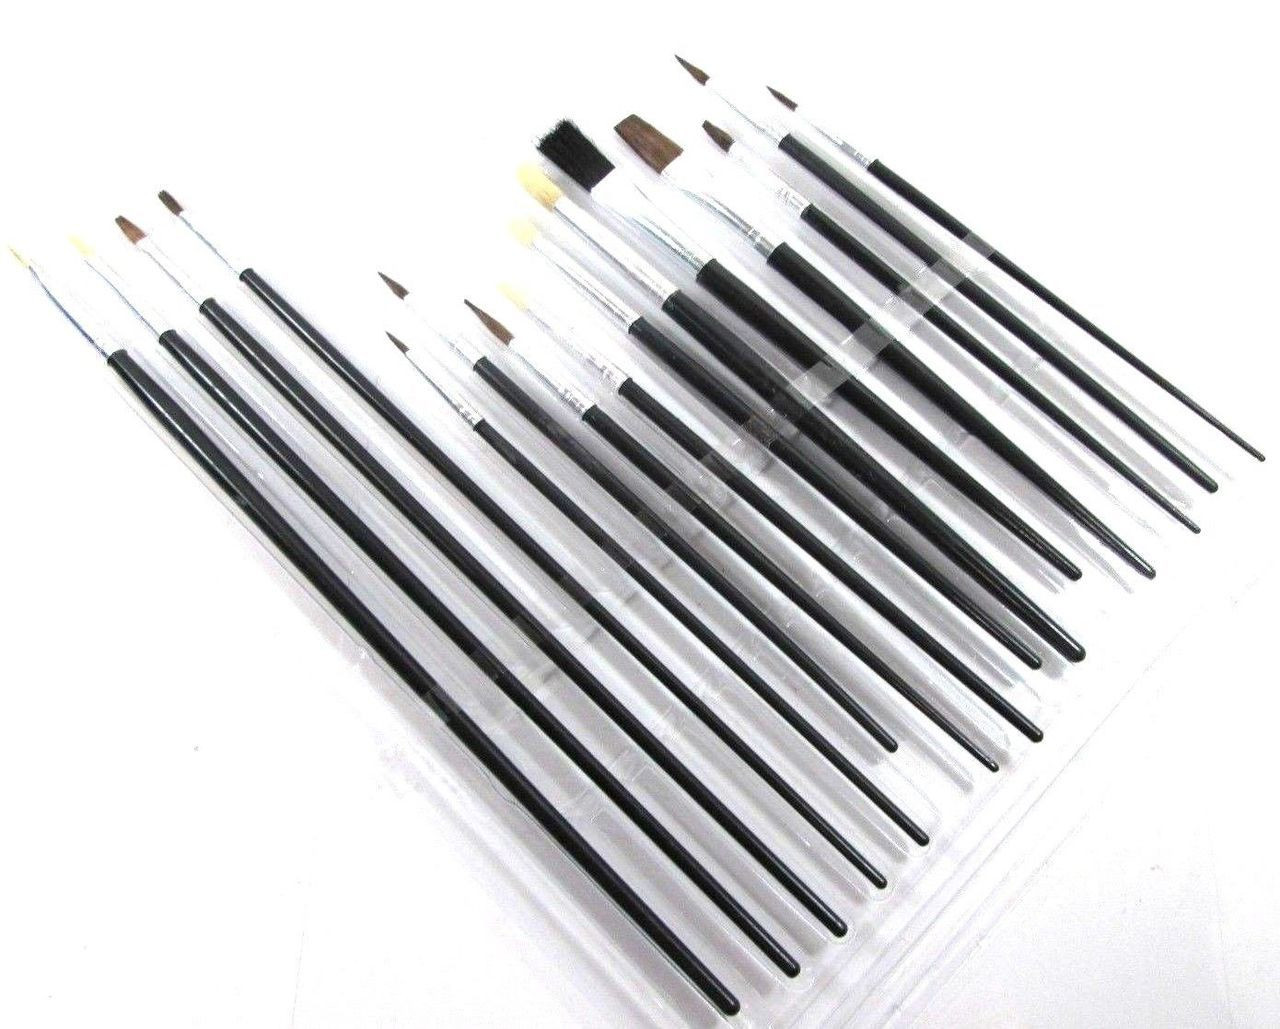  Craft15 pc Artist Brush Set Flat Pointed and RoundTipped Brushes BR015